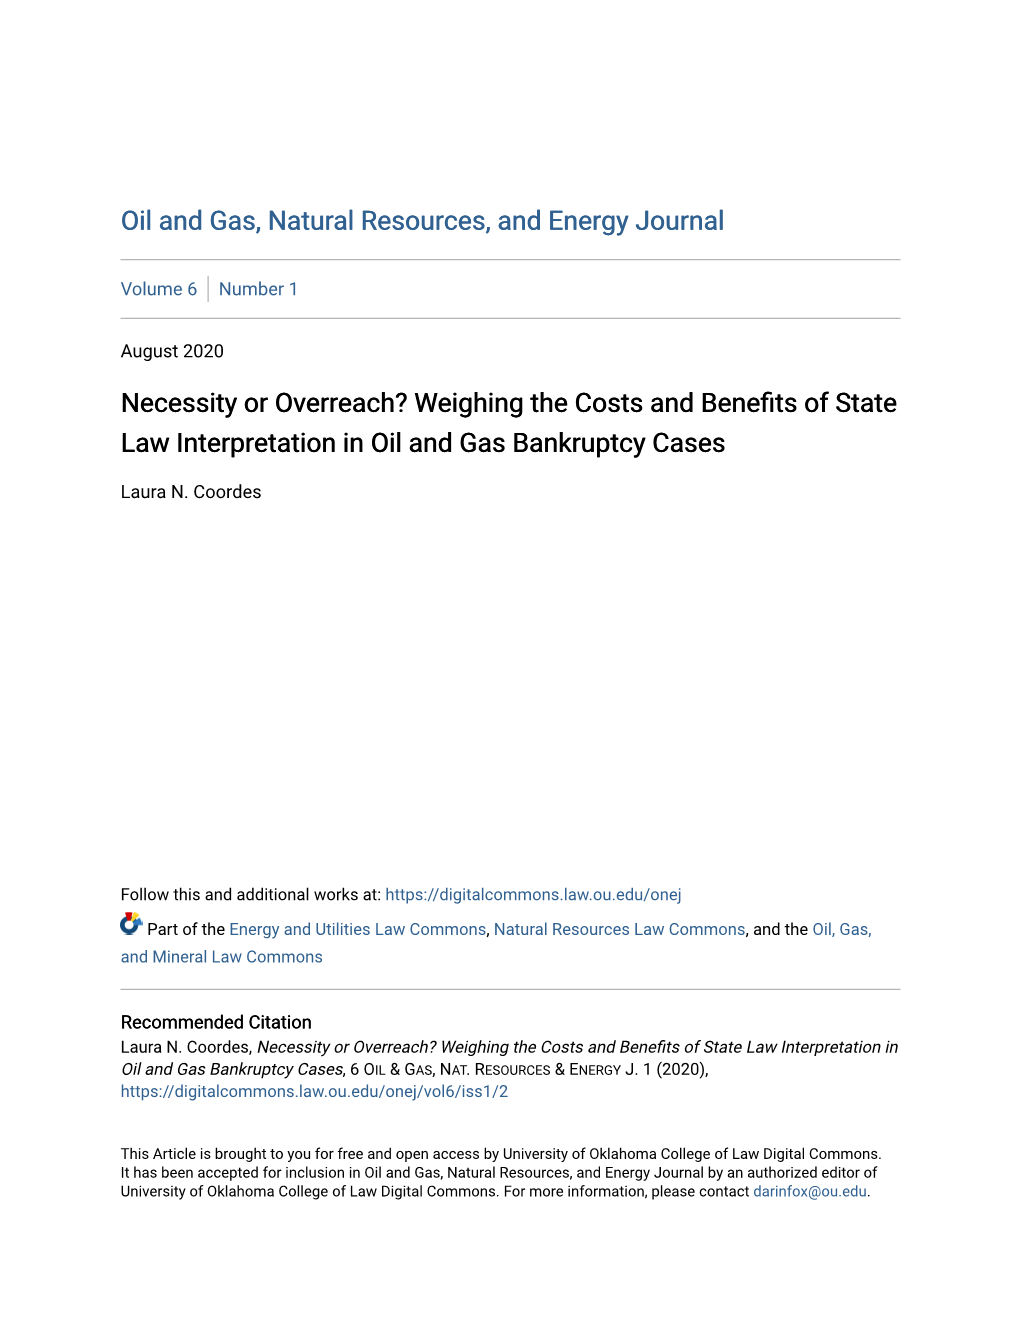 Weighing the Costs and Benefits of State Law Interpretation in Oil and Gas Bankruptcy Cases